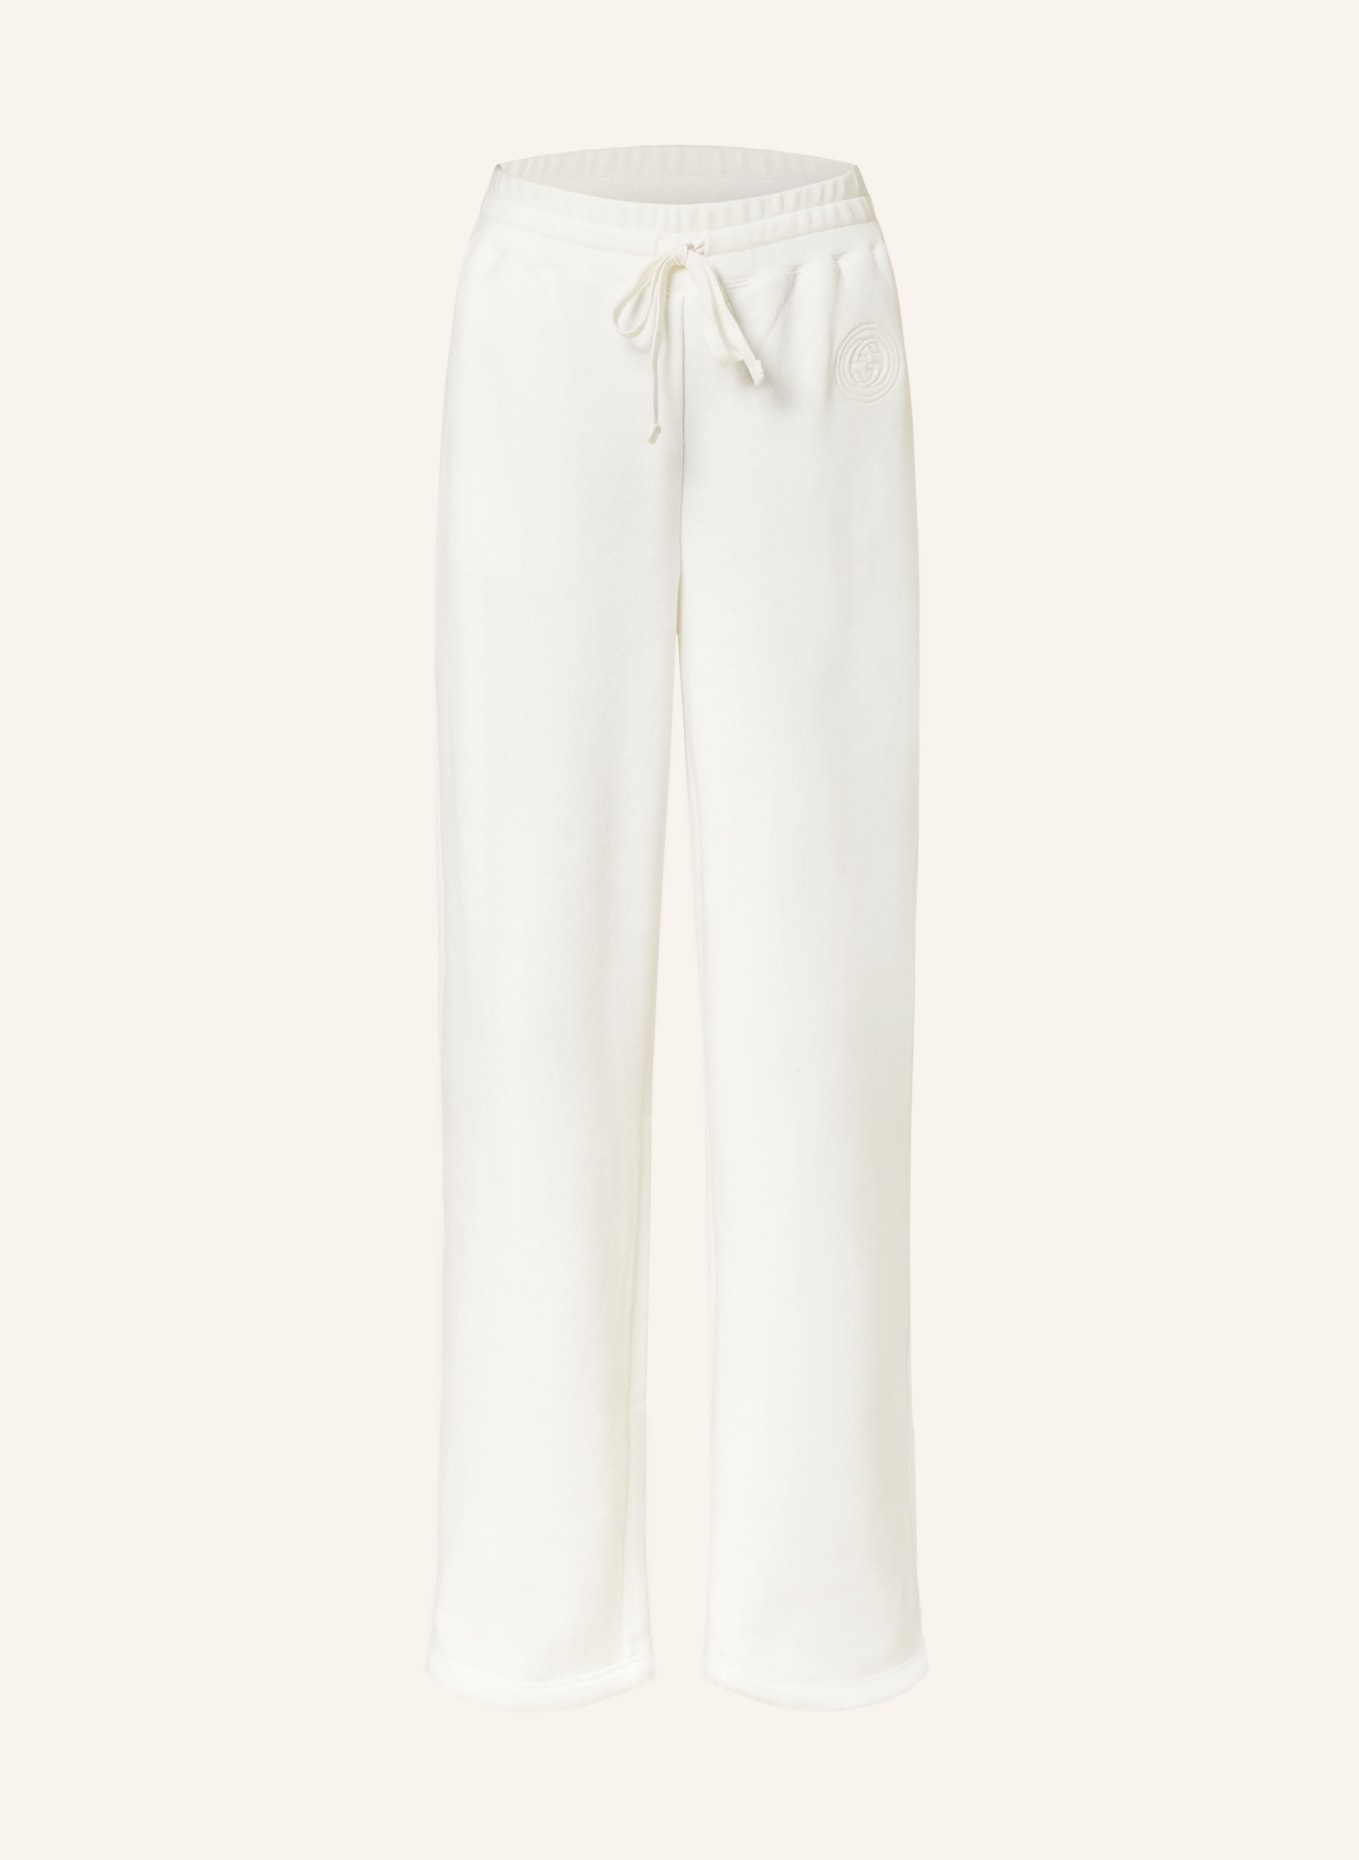 GUCCI Pants in jogger style, Color: WHITE (Image 1)